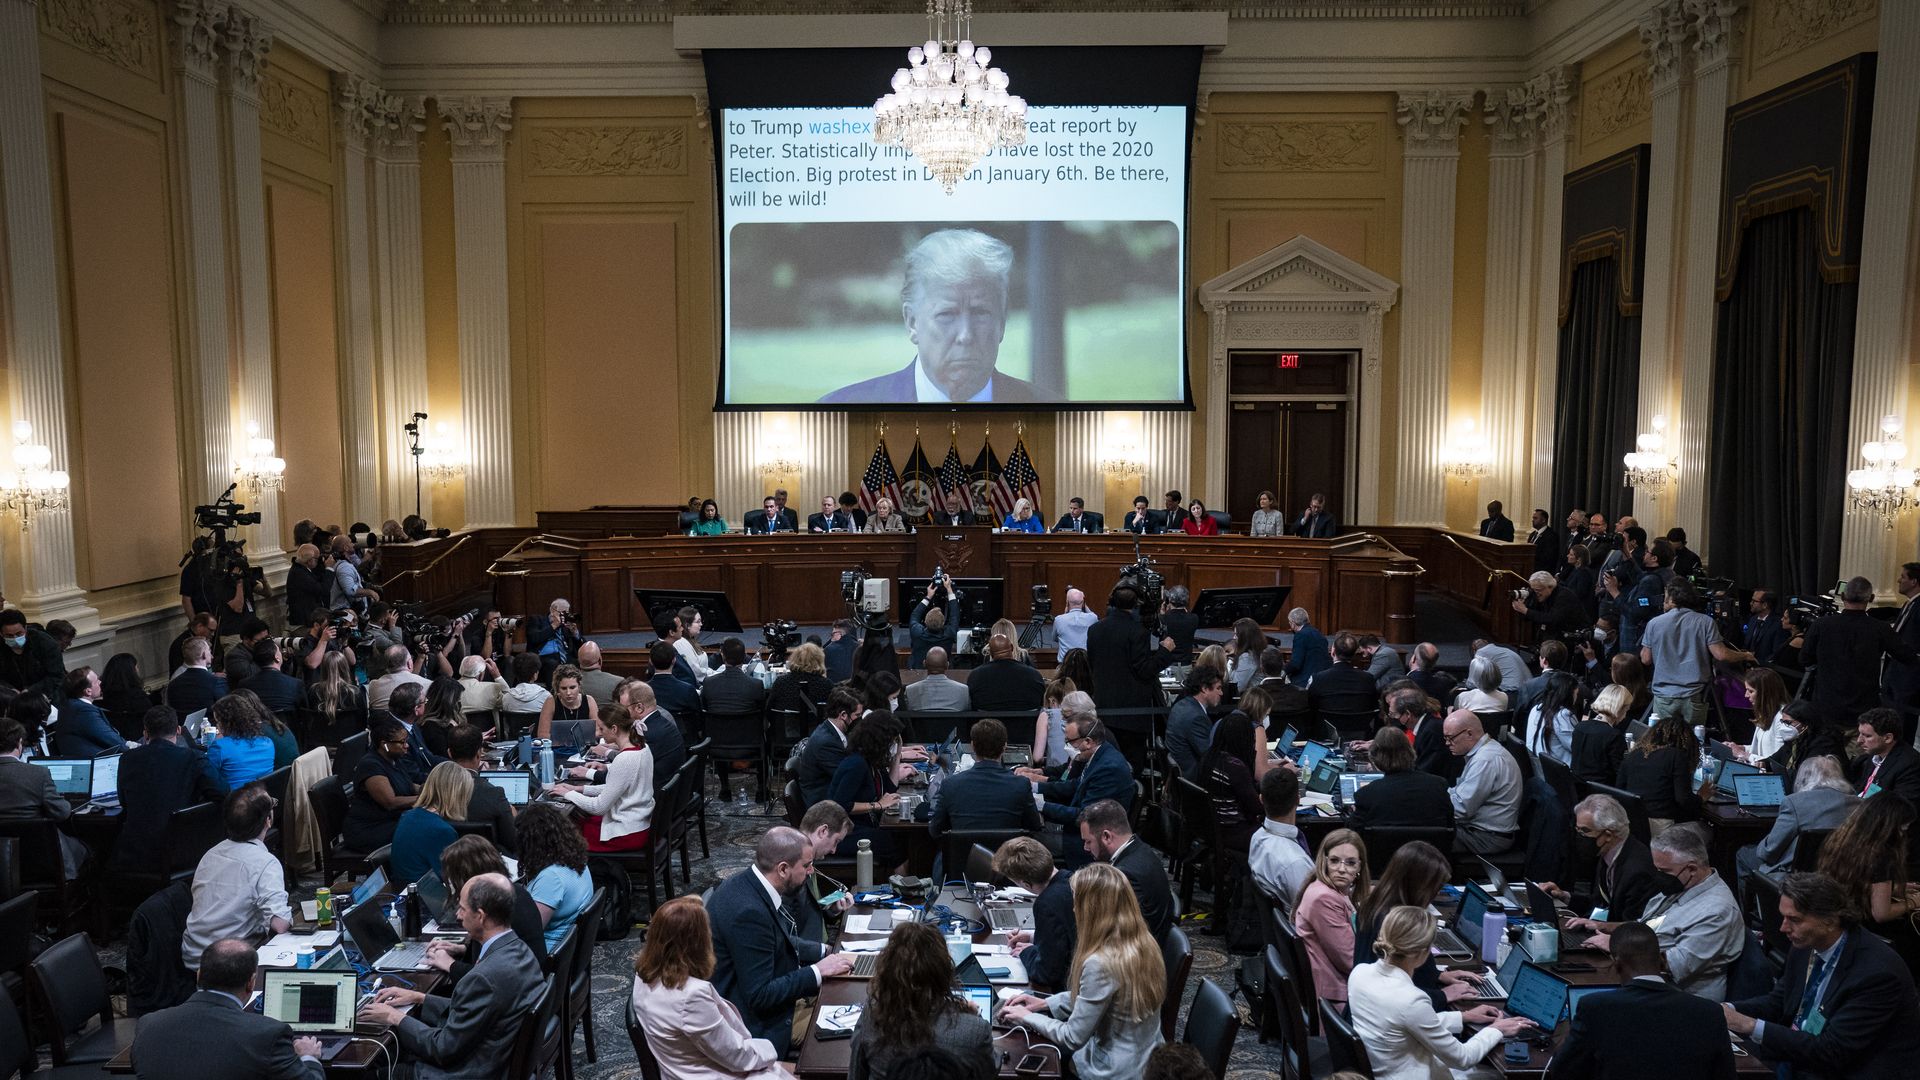 A tweet with former US President Donald Trump displayed on a screen during a hearing of the Select Committee to Investigate the January 6th Attack on the US Capitol.